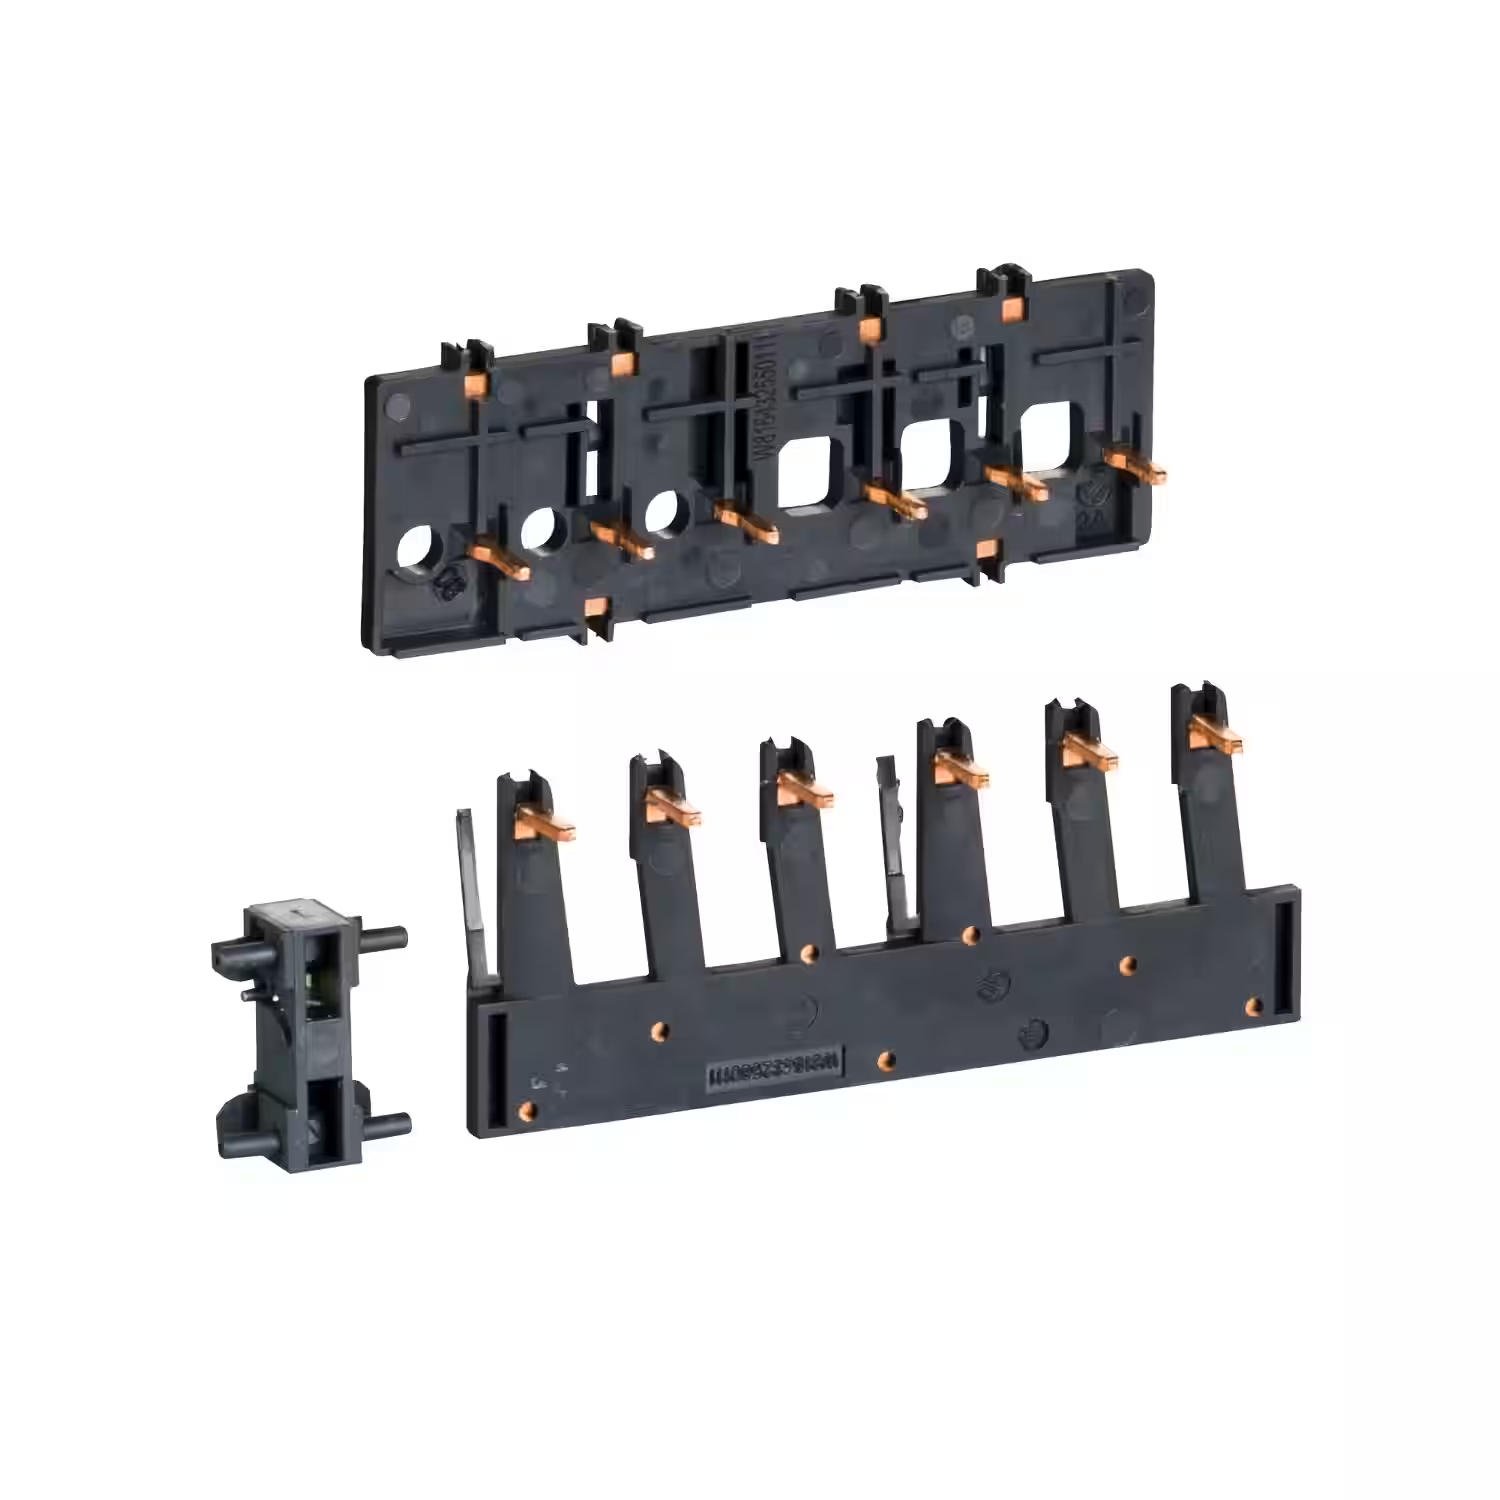 Kit for assembling 3P reversing contactors, LC1D40A-D80A with screw clamp terminals, without electrical interlock